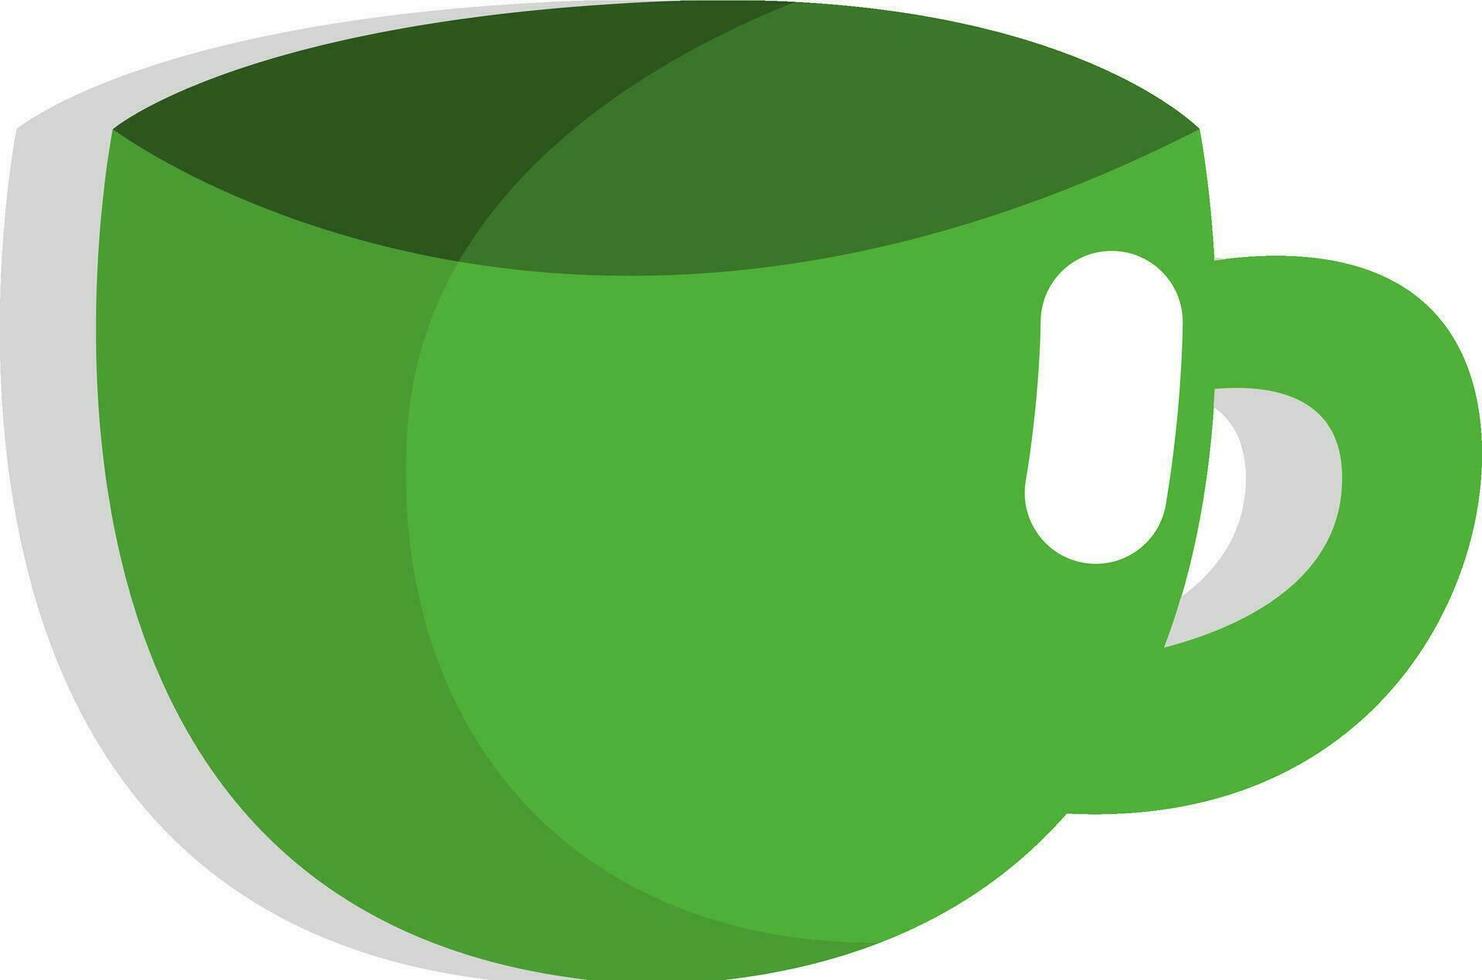 Green tea cup , icon, vector on white background.